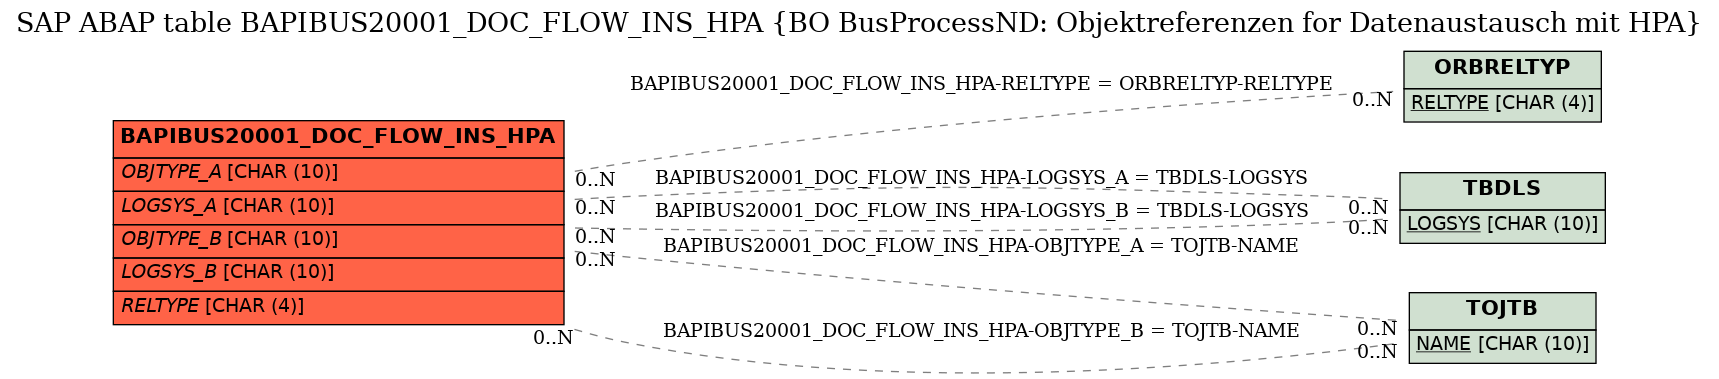 E-R Diagram for table BAPIBUS20001_DOC_FLOW_INS_HPA (BO BusProcessND: Objektreferenzen for Datenaustausch mit HPA)